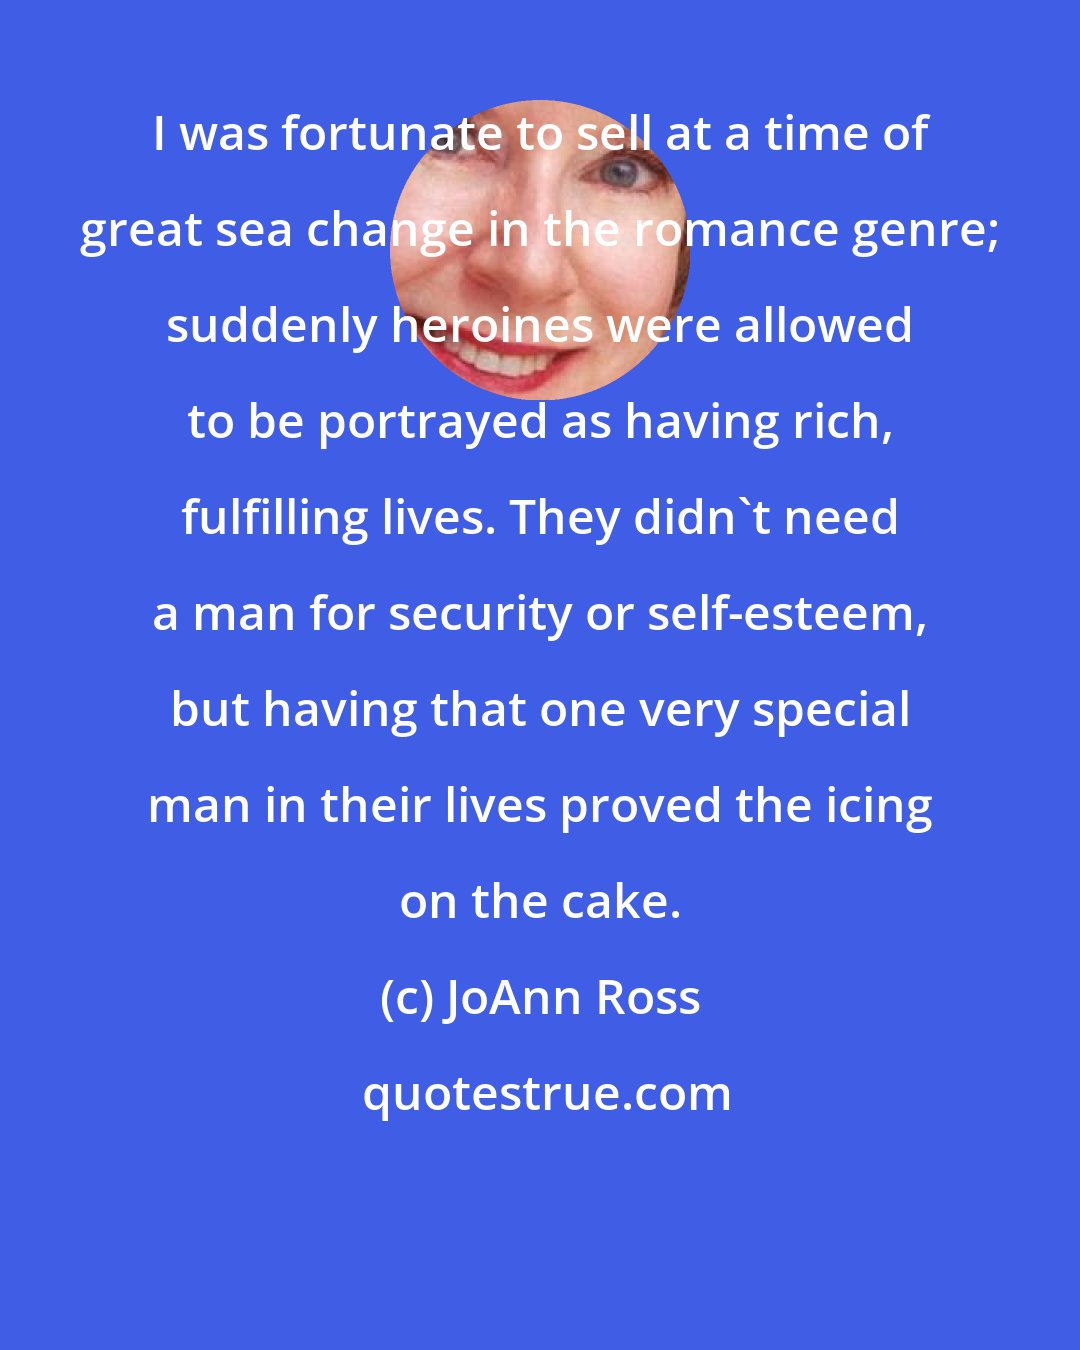 JoAnn Ross: I was fortunate to sell at a time of great sea change in the romance genre; suddenly heroines were allowed to be portrayed as having rich, fulfilling lives. They didn't need a man for security or self-esteem, but having that one very special man in their lives proved the icing on the cake.